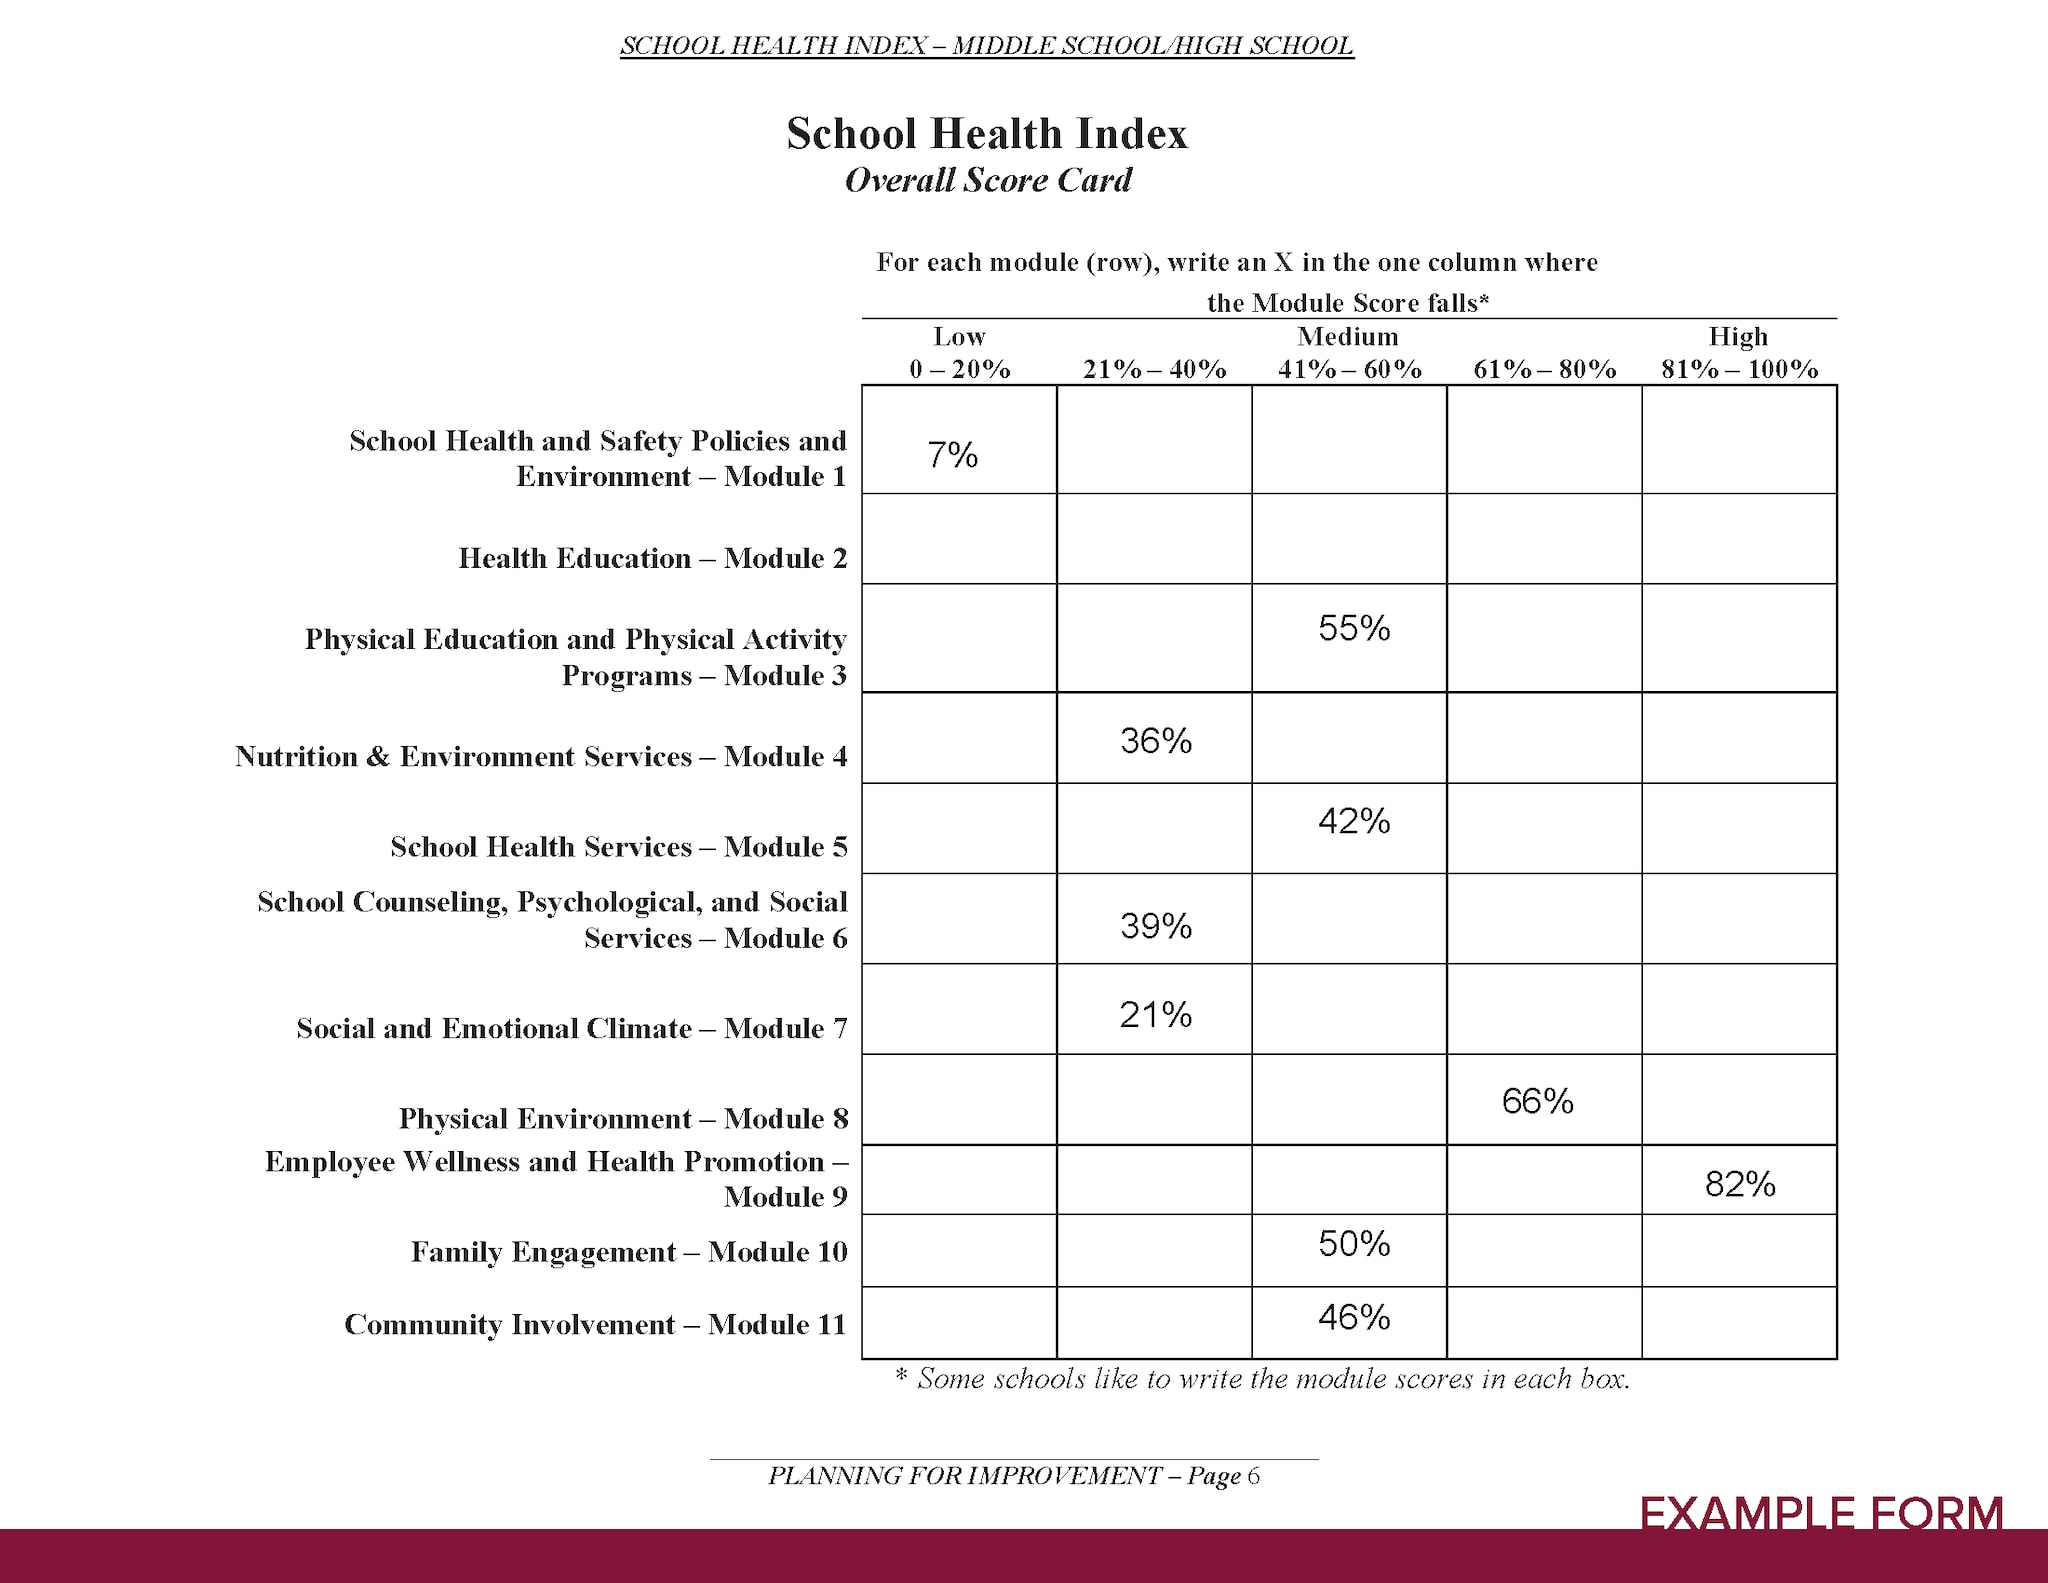 The completed Overall Score Card shows ratings for all modules. School Health and Safety Policies and Environment-Module 1 rating is 7%, which falls in the Low 0-20% range. Health Education-Module 2 rating is 40%, which falls in the 21%-40% range. Physical Education and Physical Activity Programs-Module 3 rating is 55%, which falls in the Medium 41%-60% range. Nutrition and Environment Services-Module 4 rating is 36%, which falls in the 21%-40% range. School Health Services Module 5 rating is 42%, which falls in the Medium 41%-60% range. School Counseling, Psychological, and Social Services-Module 6 rating is 39%, which falls in the 21%-40% range. Social and Emotional Climate-Module 7 rating is 21%, which falls in the 21%-40% range. Physical Environment-Module 8 rating is 66%, which falls in the 61%-80% range. Employee Wellness and Health Promotion-Module 9 rating is 82%, which falls in the High 81%-100% range. Family Engagement-Module 10 rating is 50%, which falls in the Medium 41%-60% range. Community Involvement-Module 11 rating is 46%, which falls in the Medium 41%-60% range.